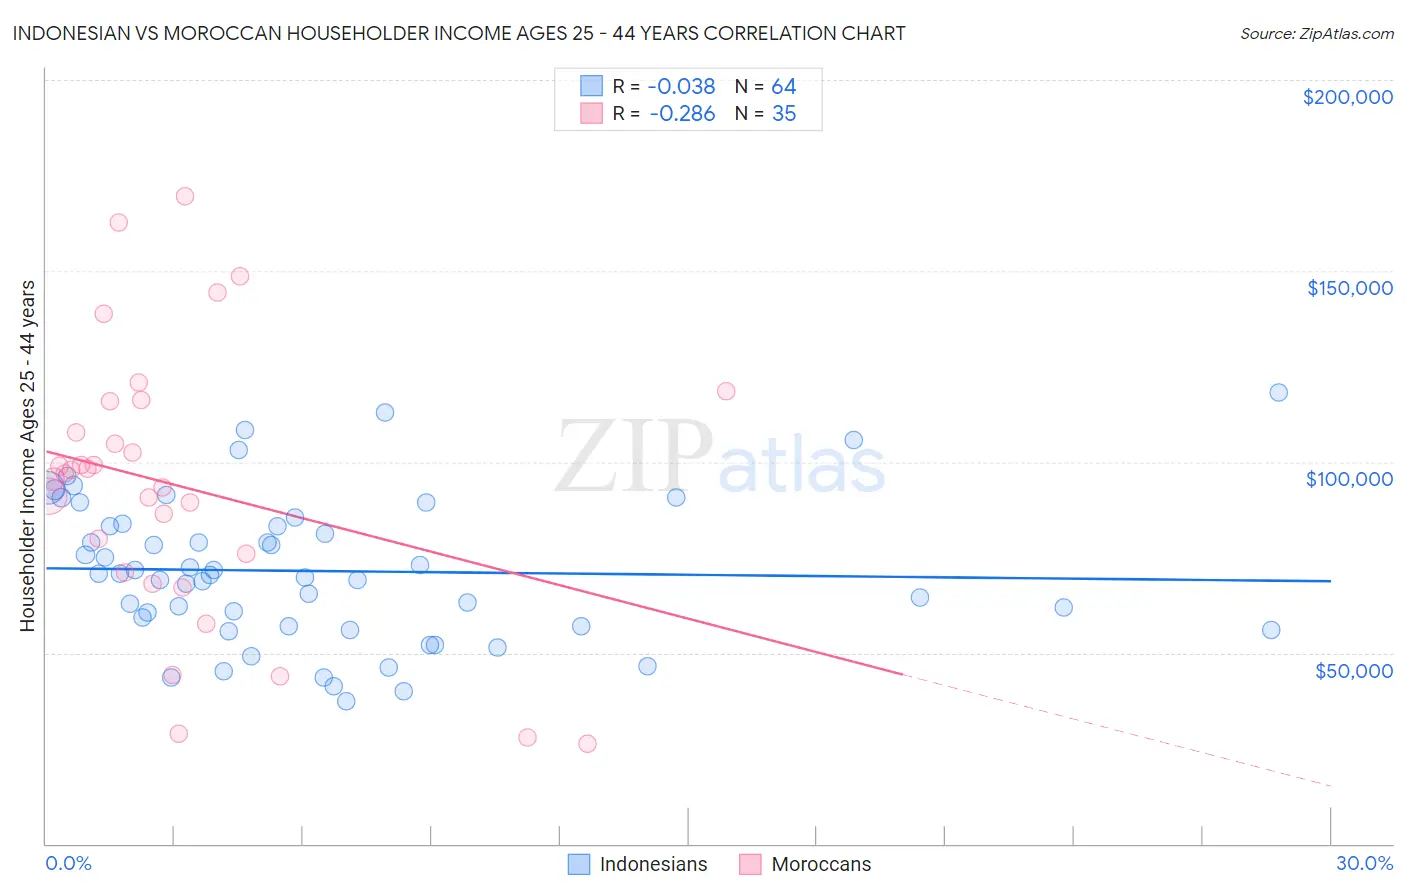 Indonesian vs Moroccan Householder Income Ages 25 - 44 years